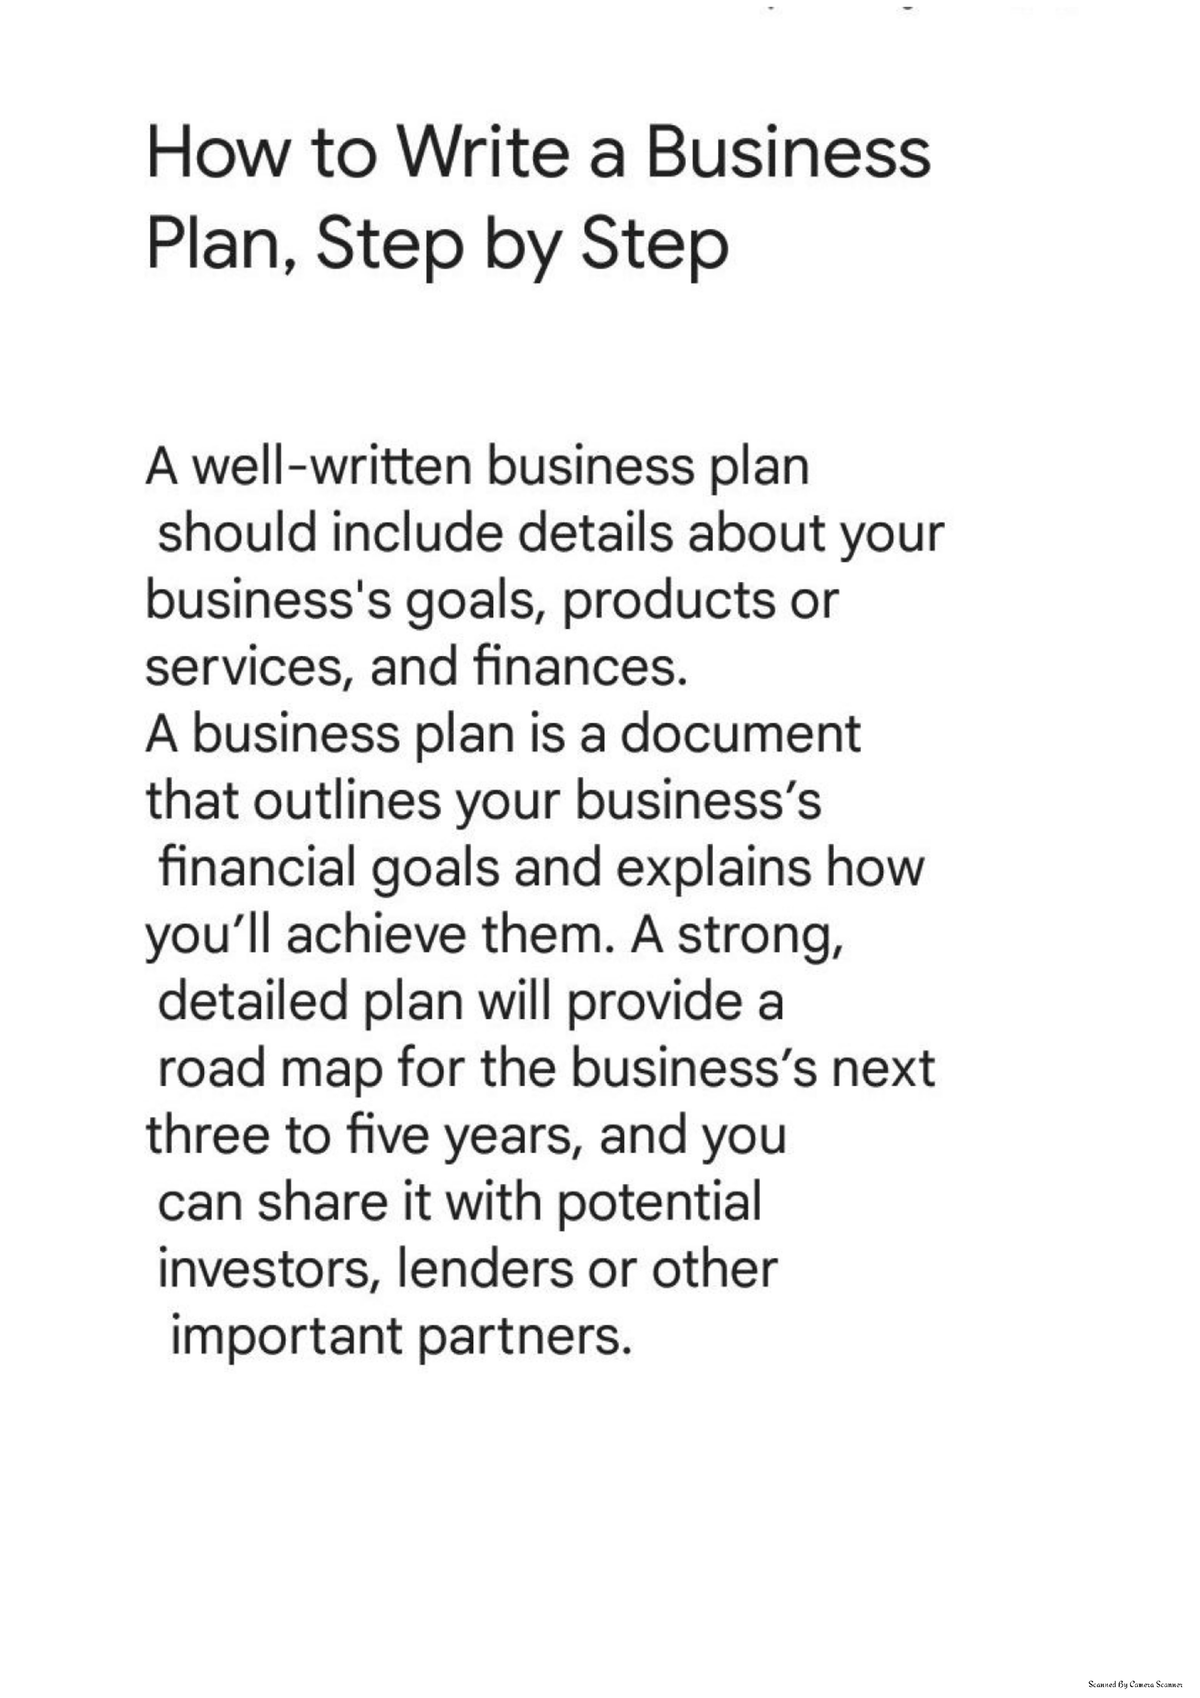 how-to-write-a-business-plan-step-by-step-business-management-studocu